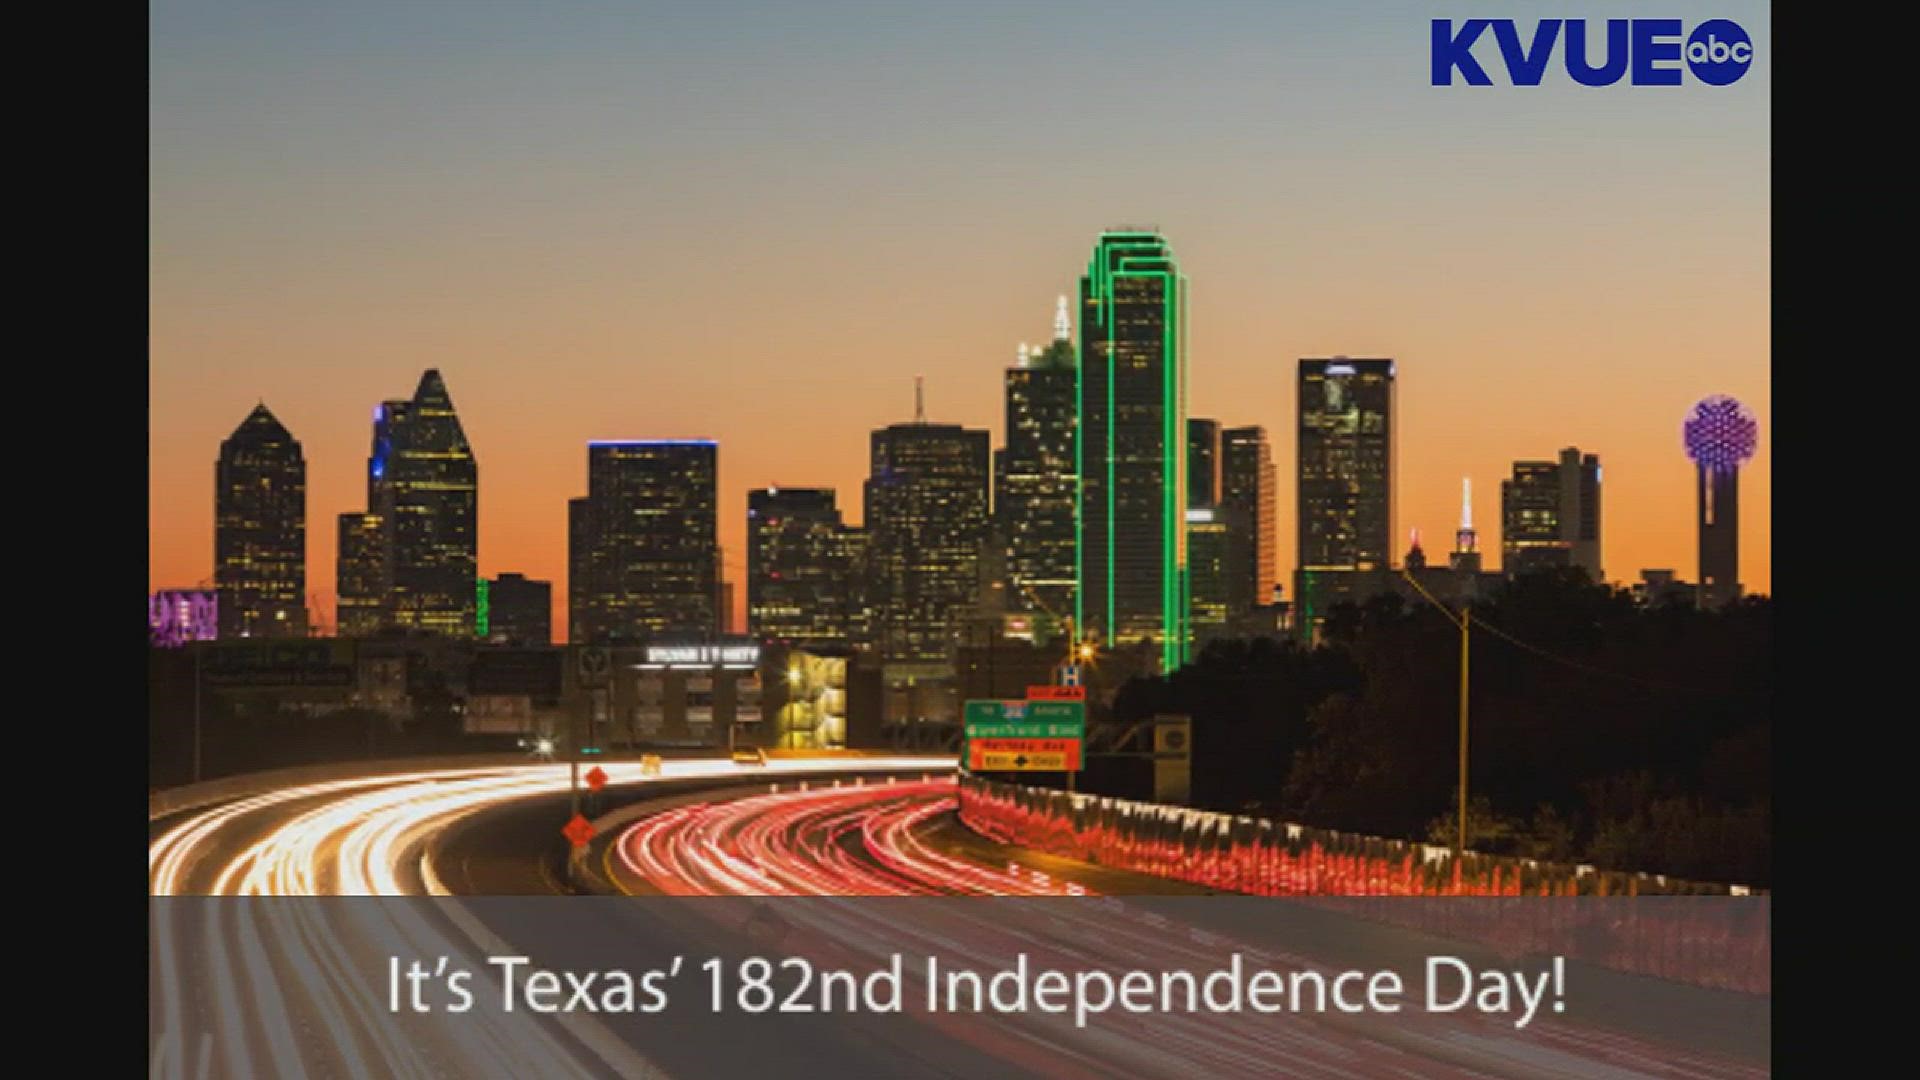 Happy 182nd Independence Day, Texas! Here are 82 fun facts about our Lone Star State.